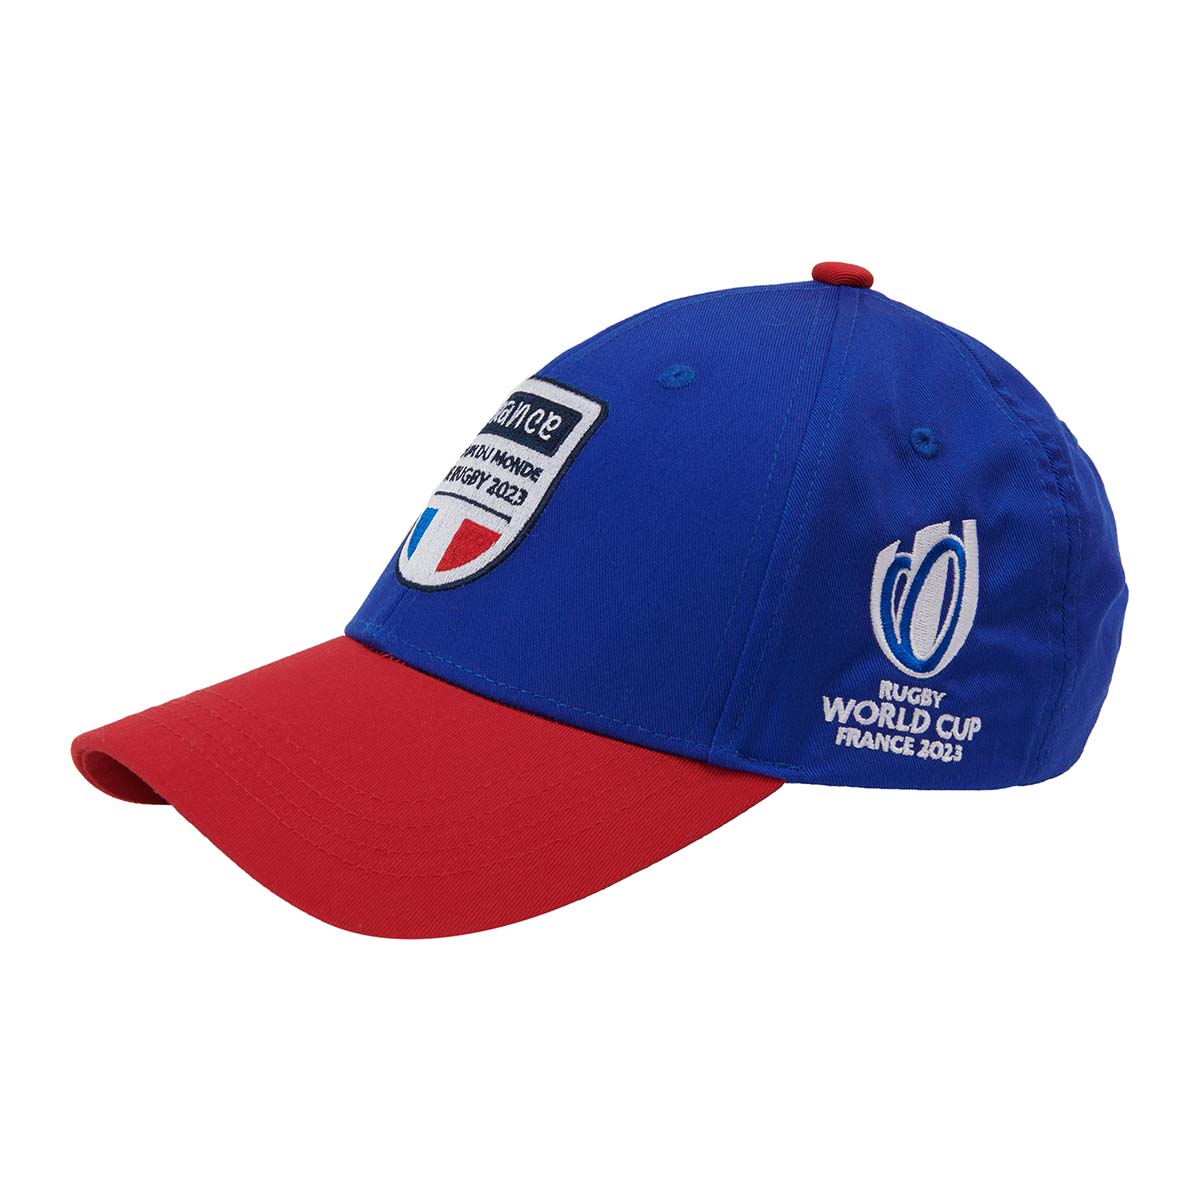 Rugby World Cup 2023 Adults France Baseball Cap - Navy and Red | rugbystore